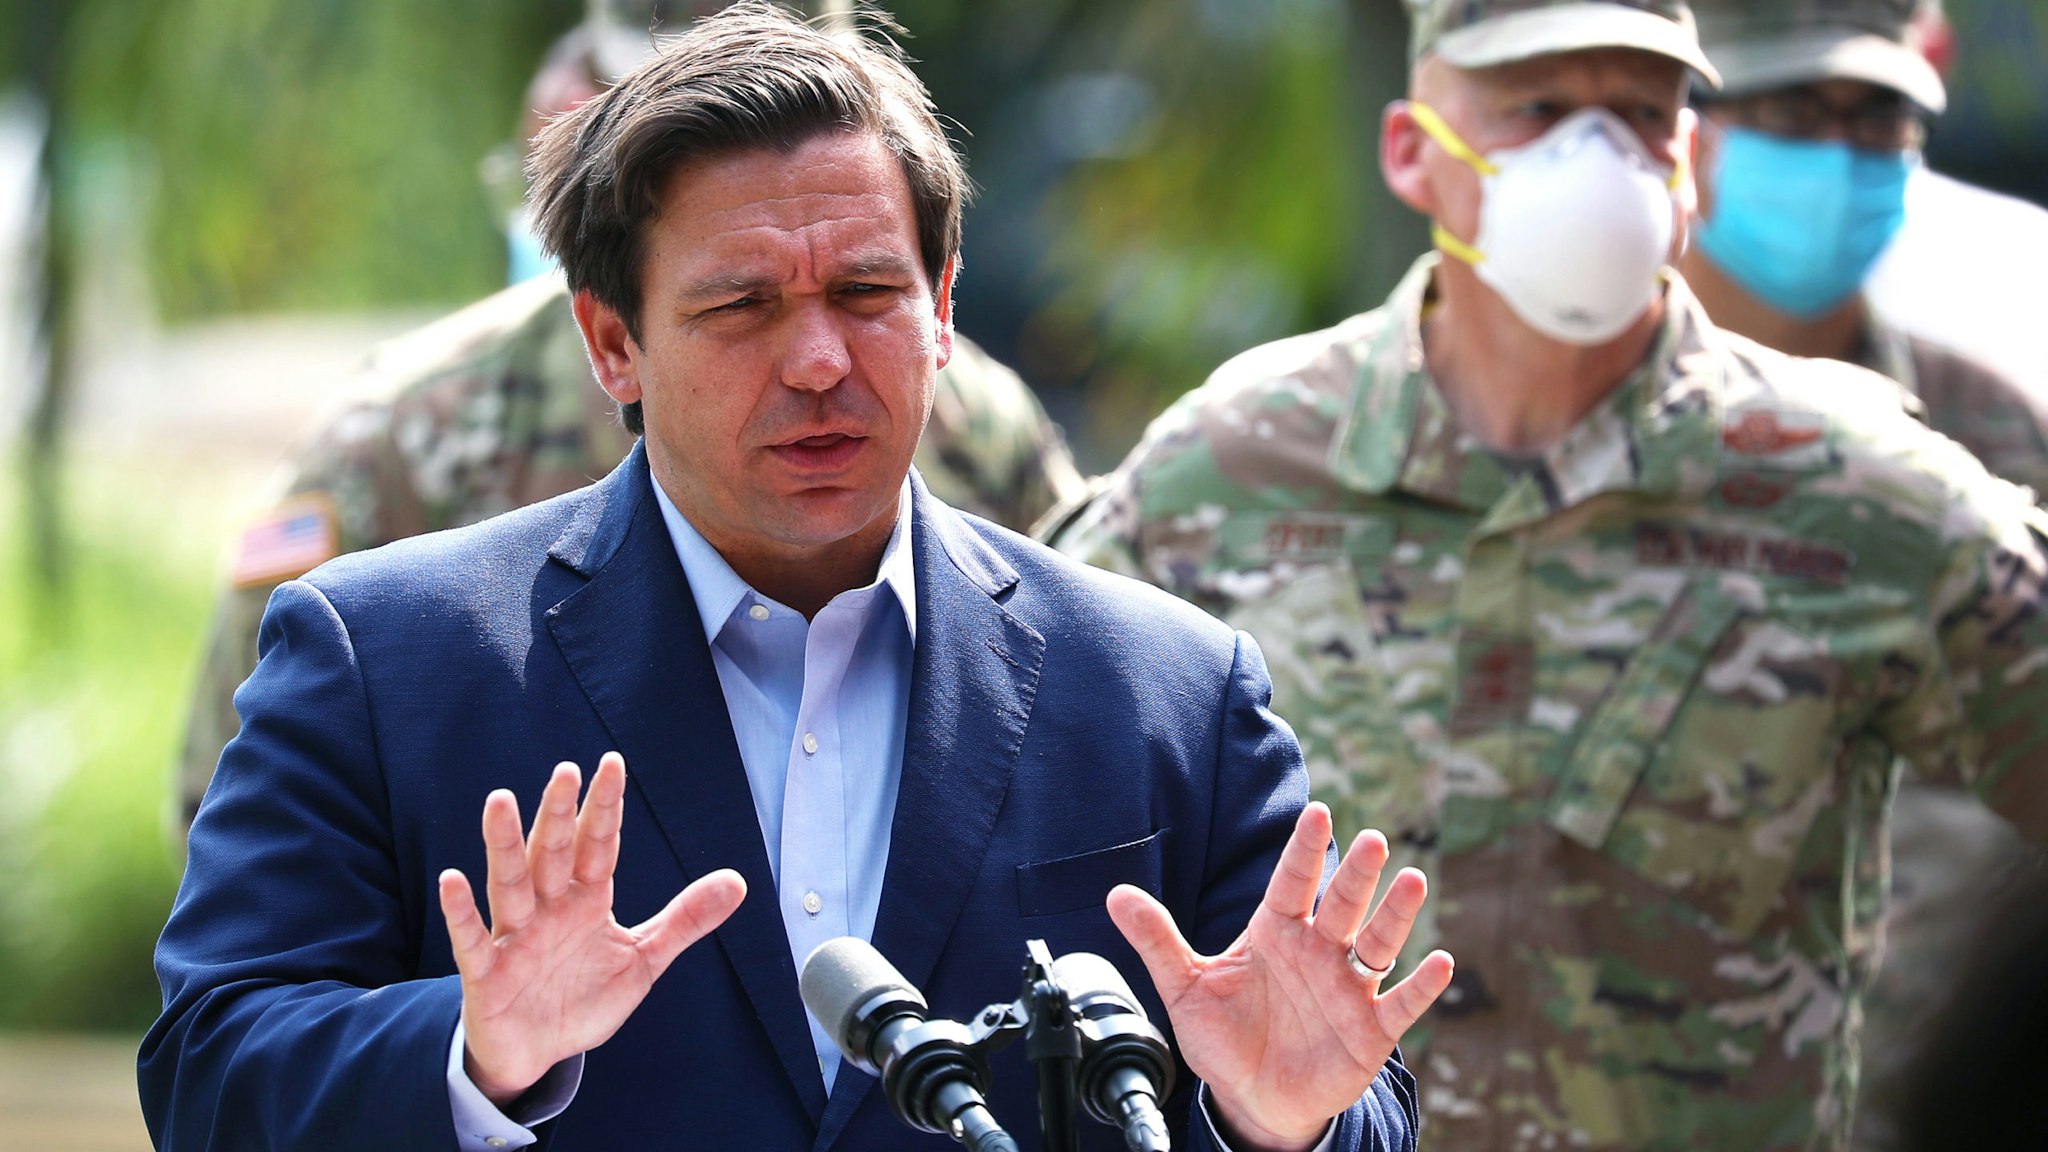 FORT LAUDERDALE, FLORIDA - APRIL 17: Florida Gov. Ron DeSantis gives updates about the state's response to the coronavirus pandemic during a press conference on April 17, 2020 in Fort Lauderdale, Florida. The governor announced that starting Saturday, two walk-up testing sites will open in Broward County — one at the Urban League of Broward County in Fort Lauderdale and the other at Mitchell Moore Park in Pompano Beach.